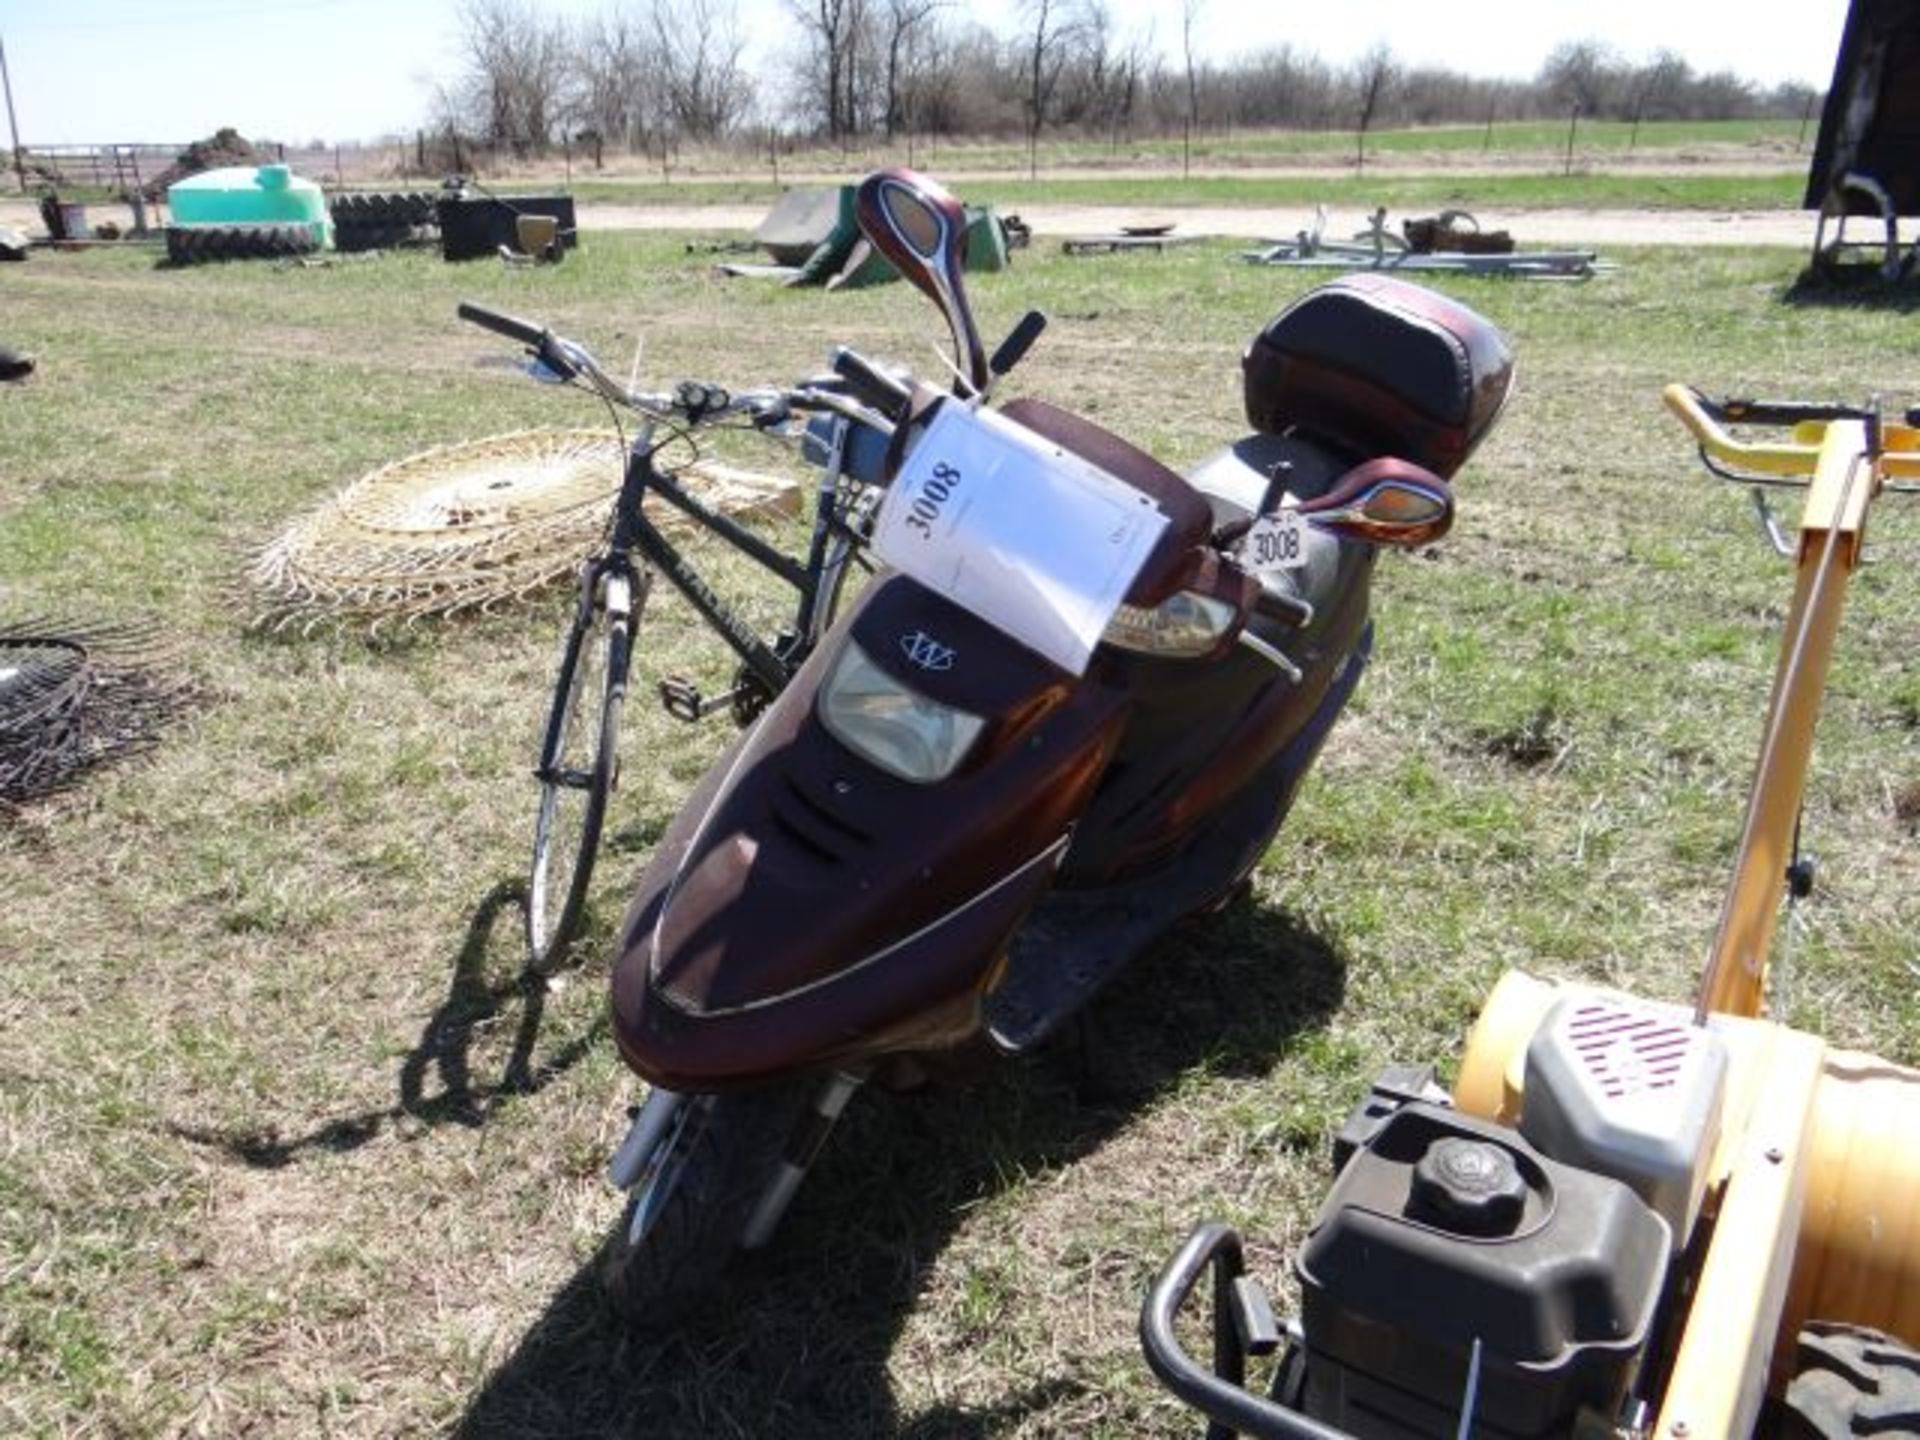 Lot 3008 Wildfire MoPed Not Running, No Title - Image 3 of 4